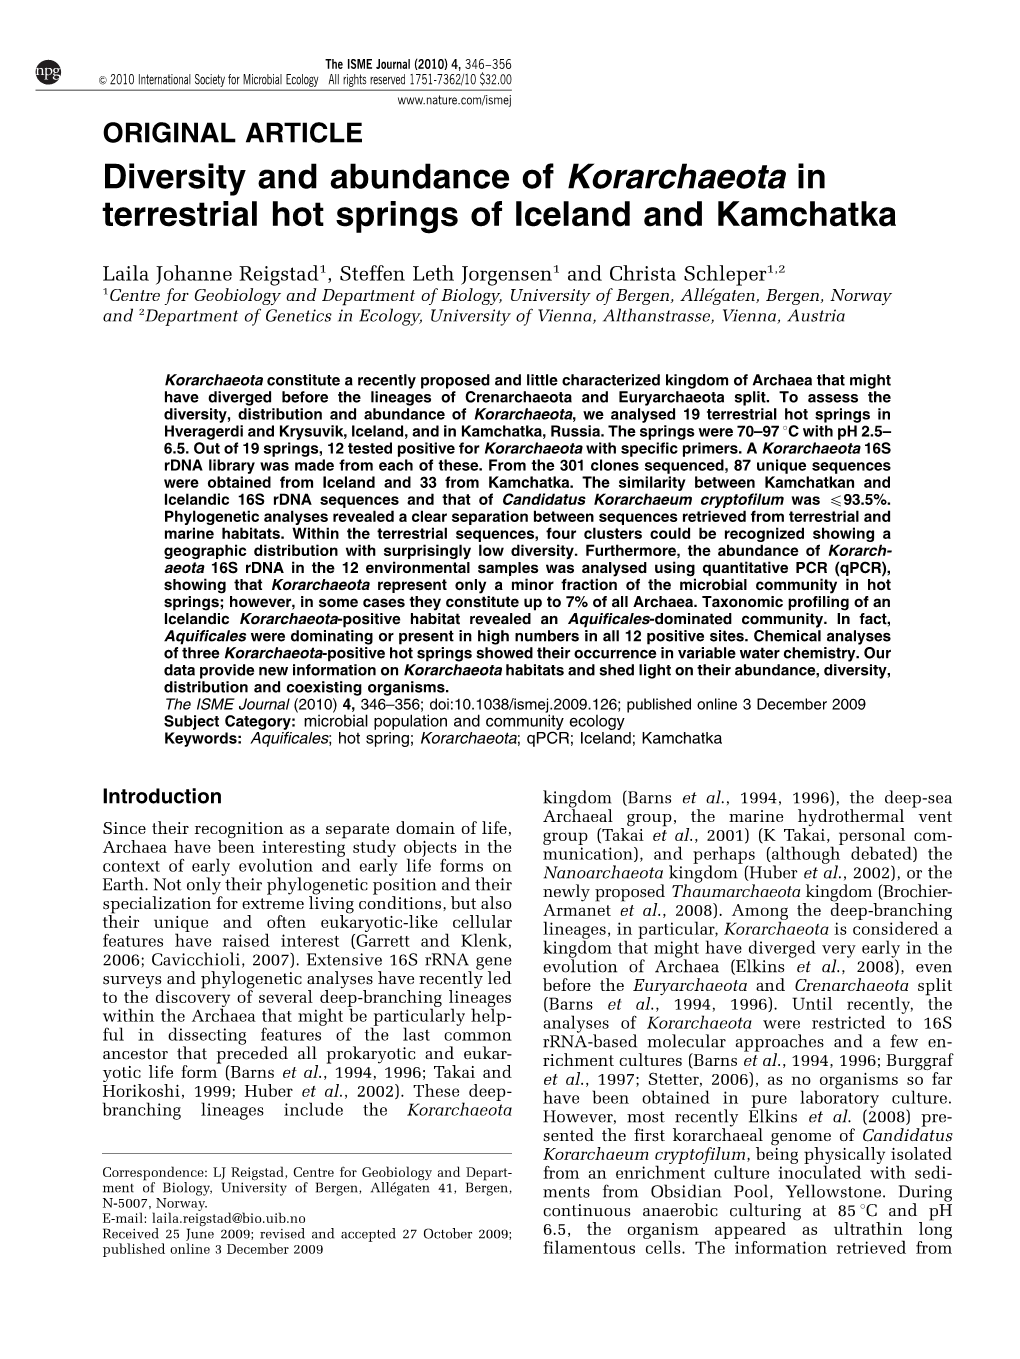 Diversity and Abundance of Korarchaeota in Terrestrial Hot Springs of Iceland and Kamchatka